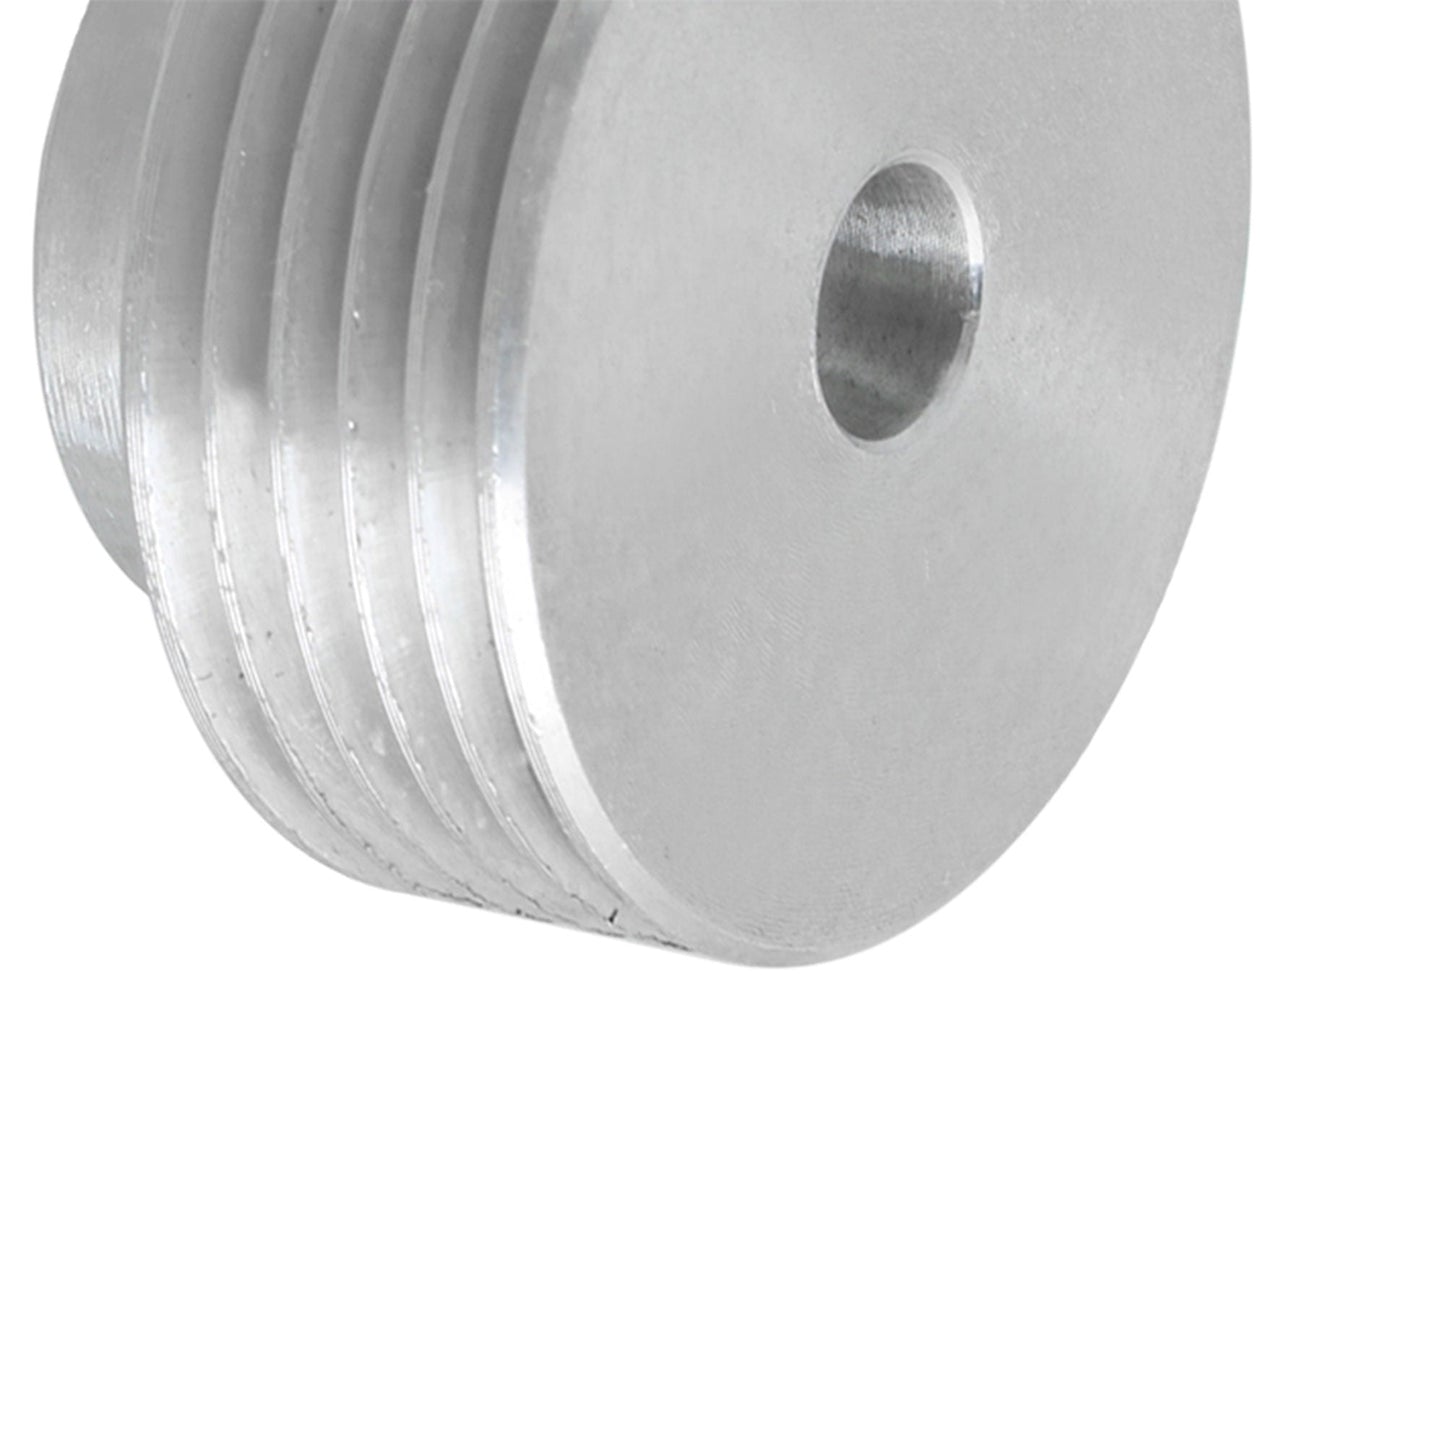 BQLZR 40mm Diameter 8mm Bore Silver Machine Power Tool Accessories Multi Wedge Belt Pulley Fitting for V-Belt